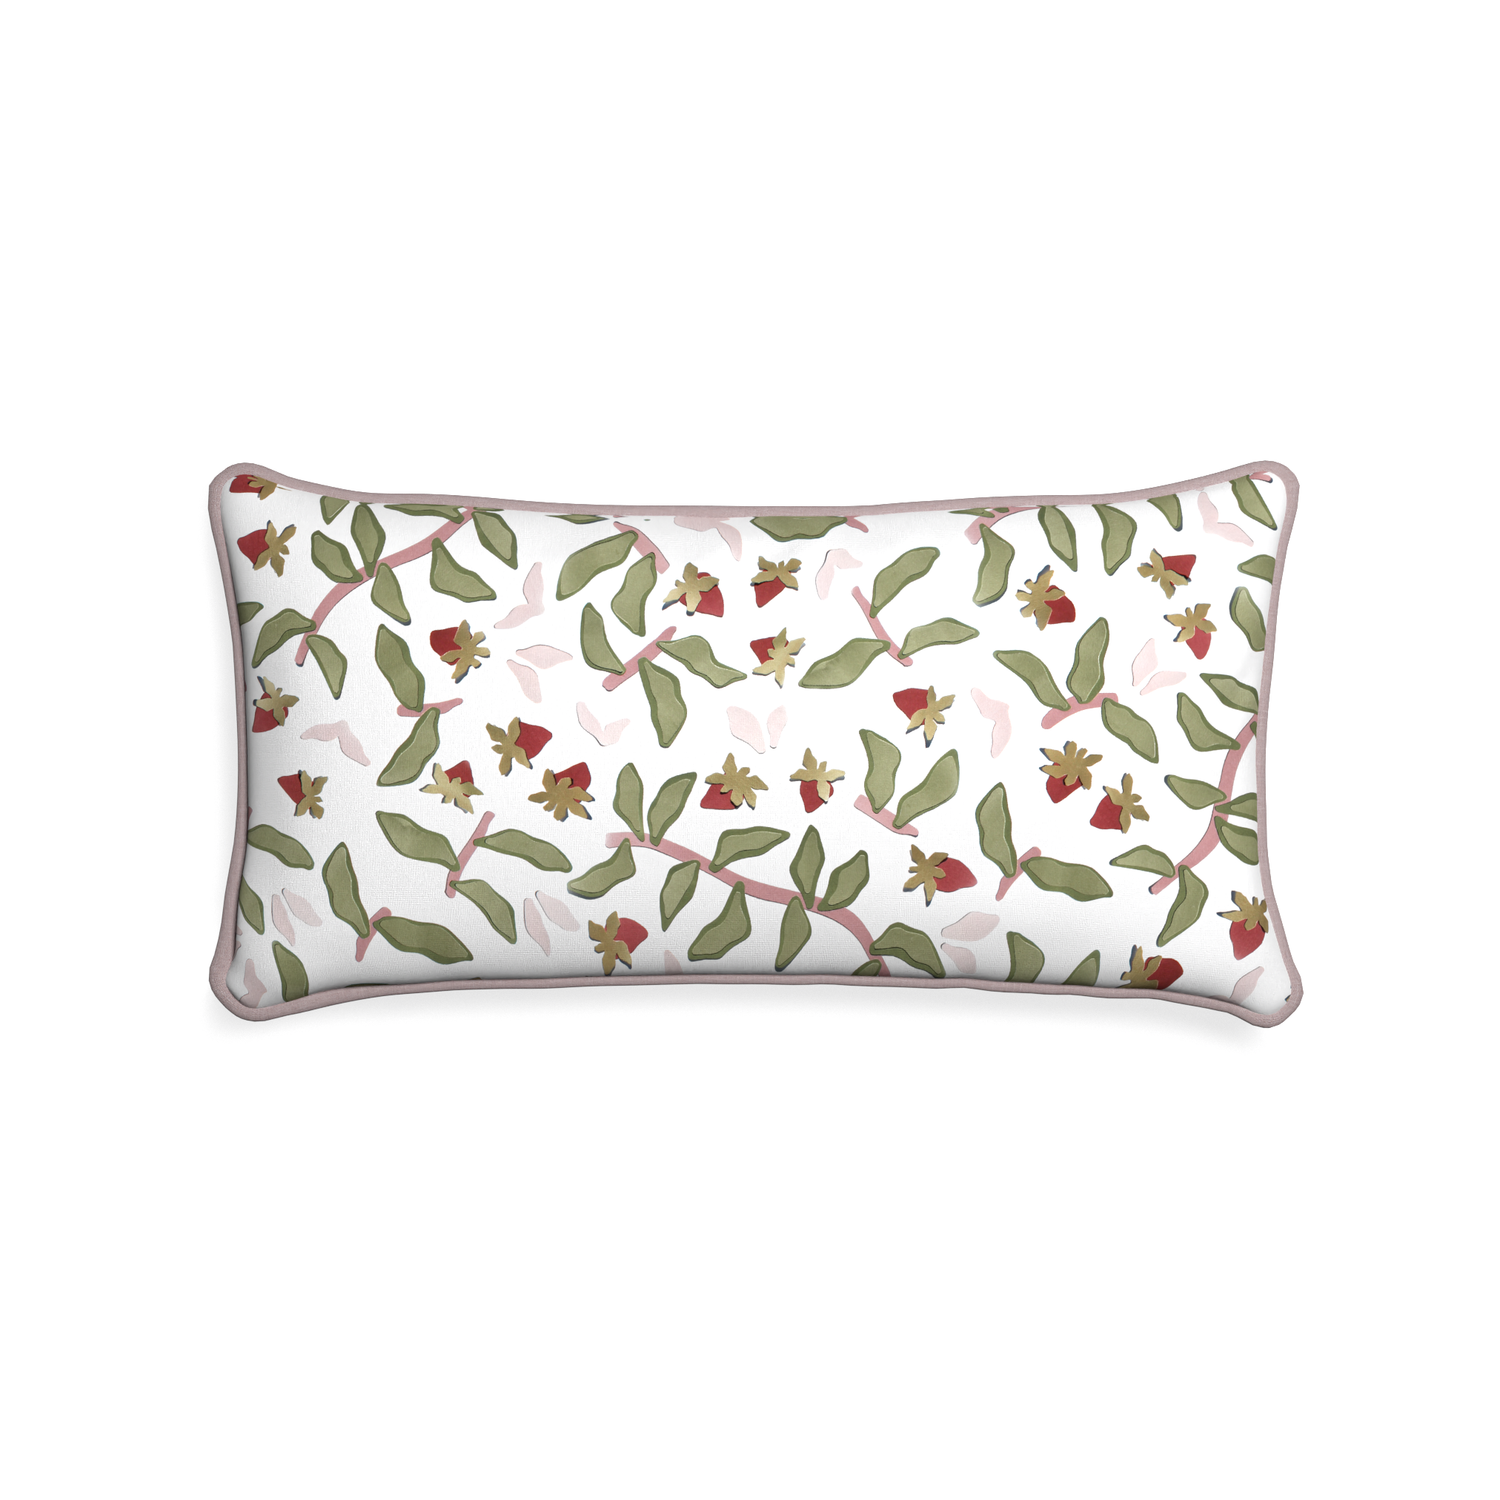 Midi-lumbar nellie custom strawberry & botanicalpillow with orchid piping on white background